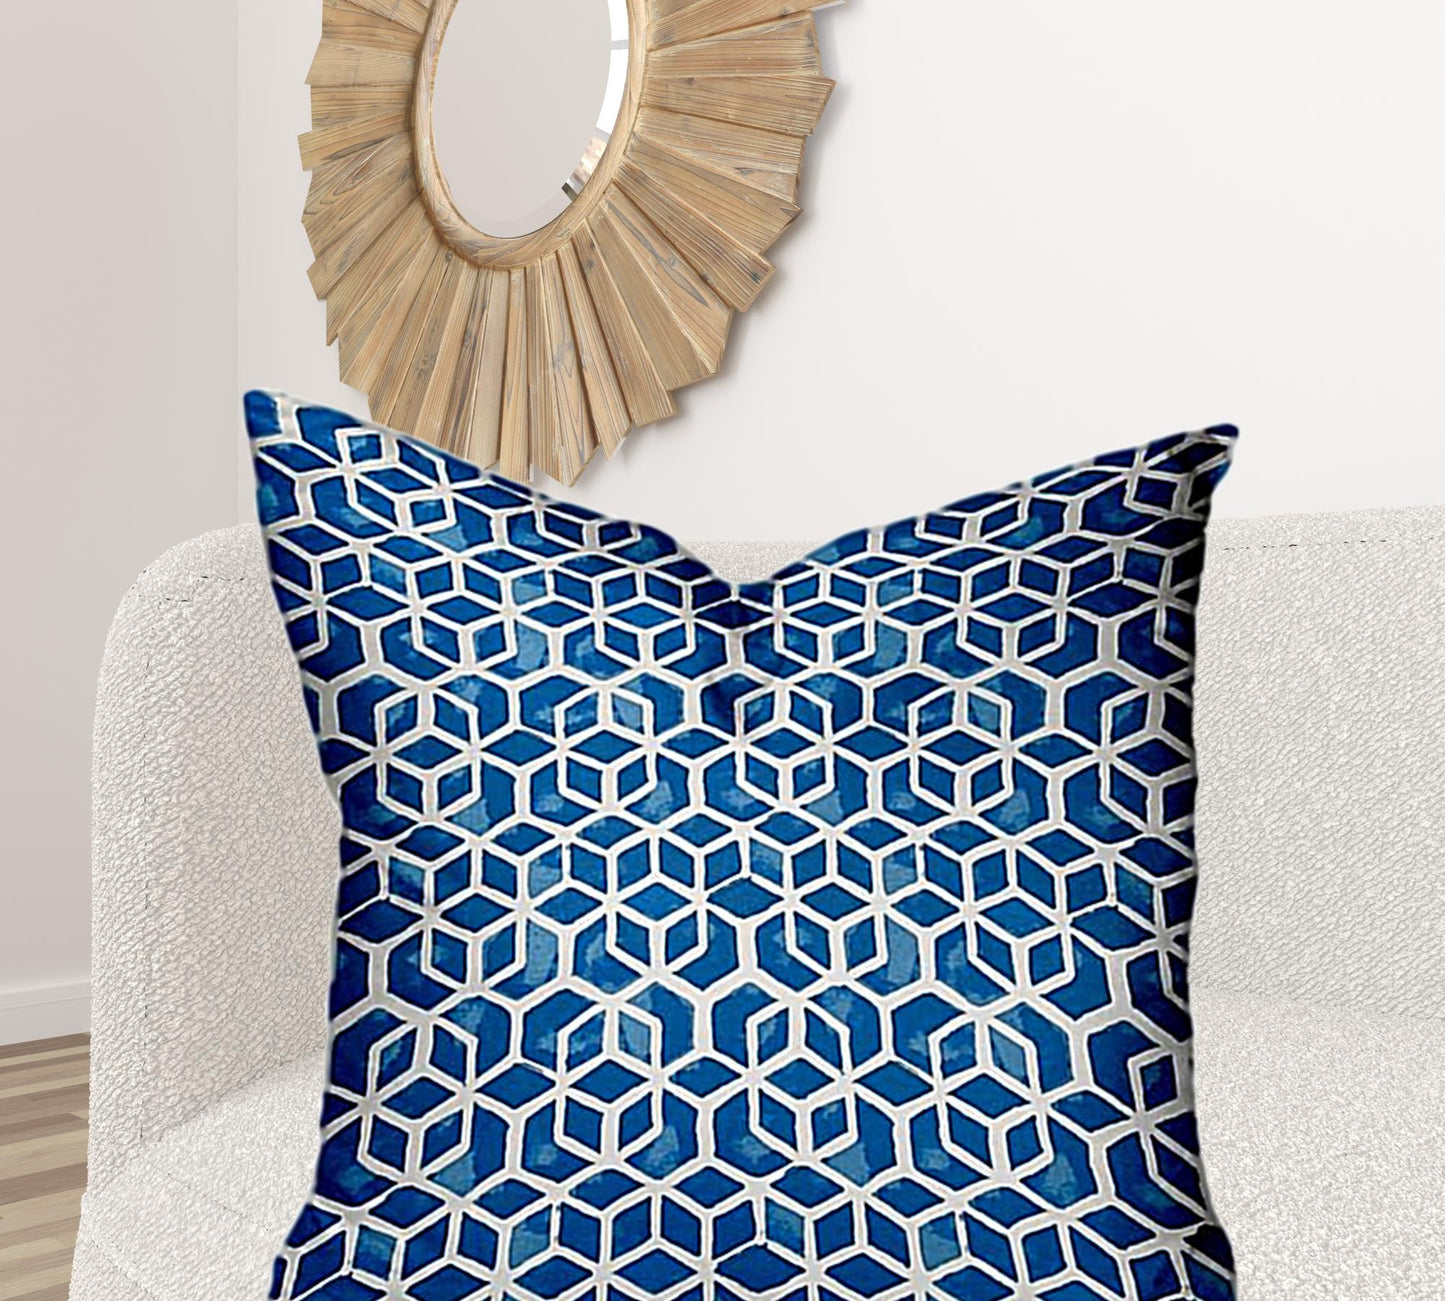 36" X 36" Blue And White Blown Seam Geometric Throw Indoor Outdoor Pillow